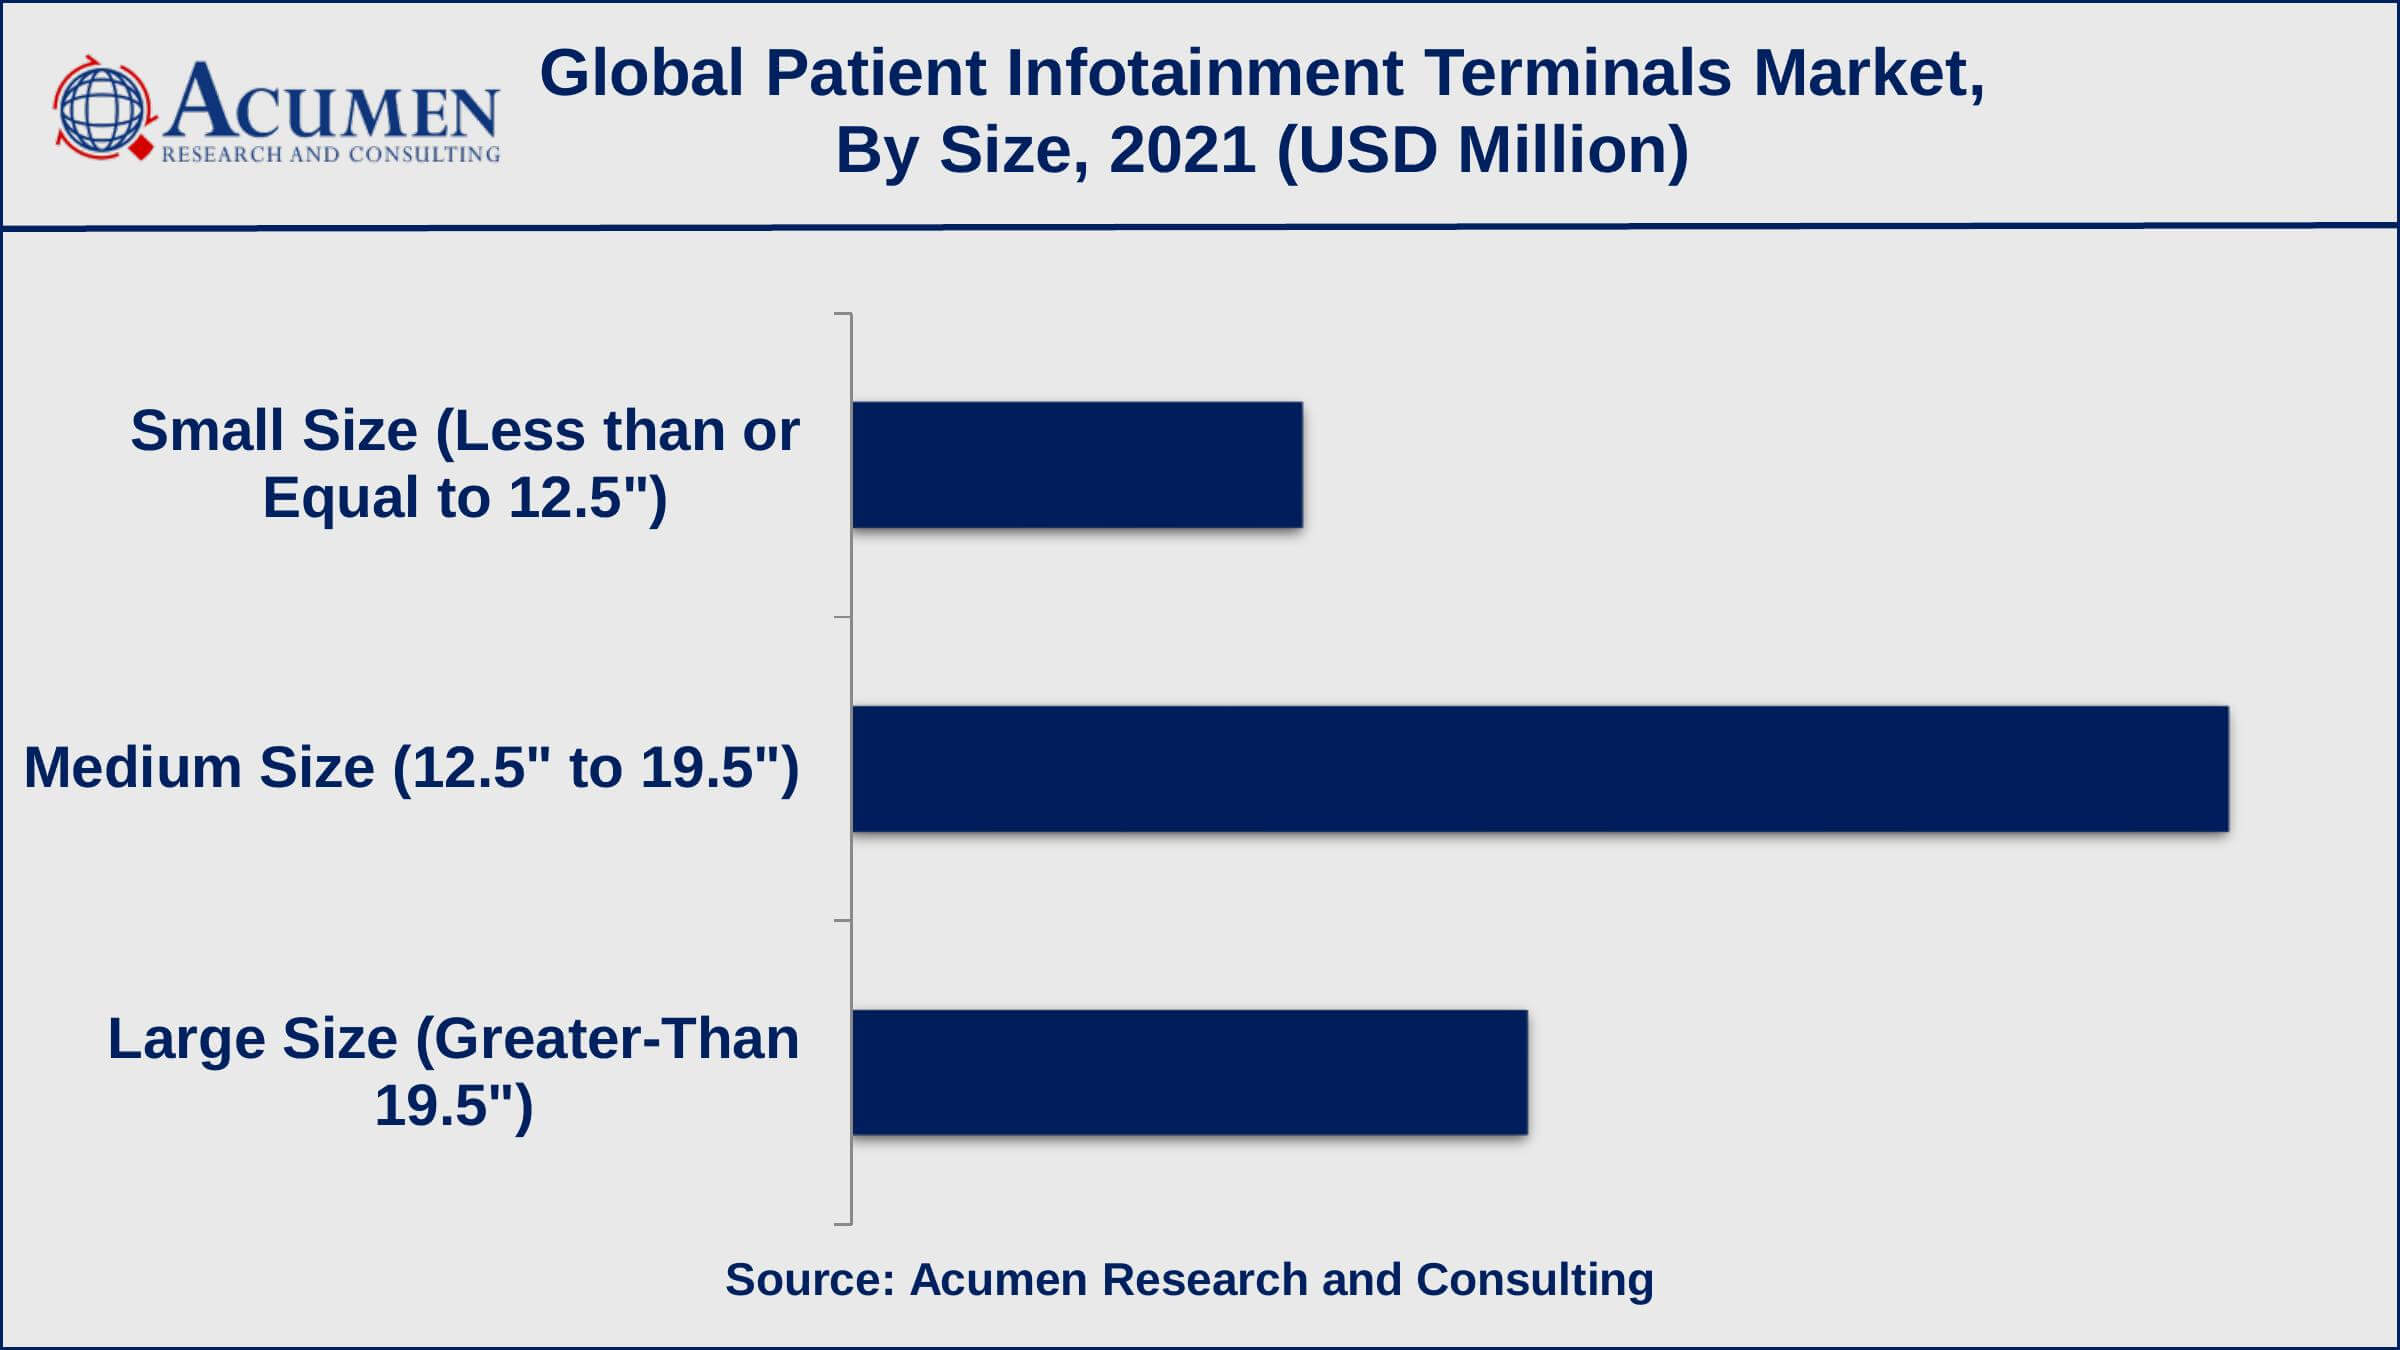 Asia-Pacific patient infotainment terminals market growth is assumed to record approx 12% CAGR from 2022 to 2030